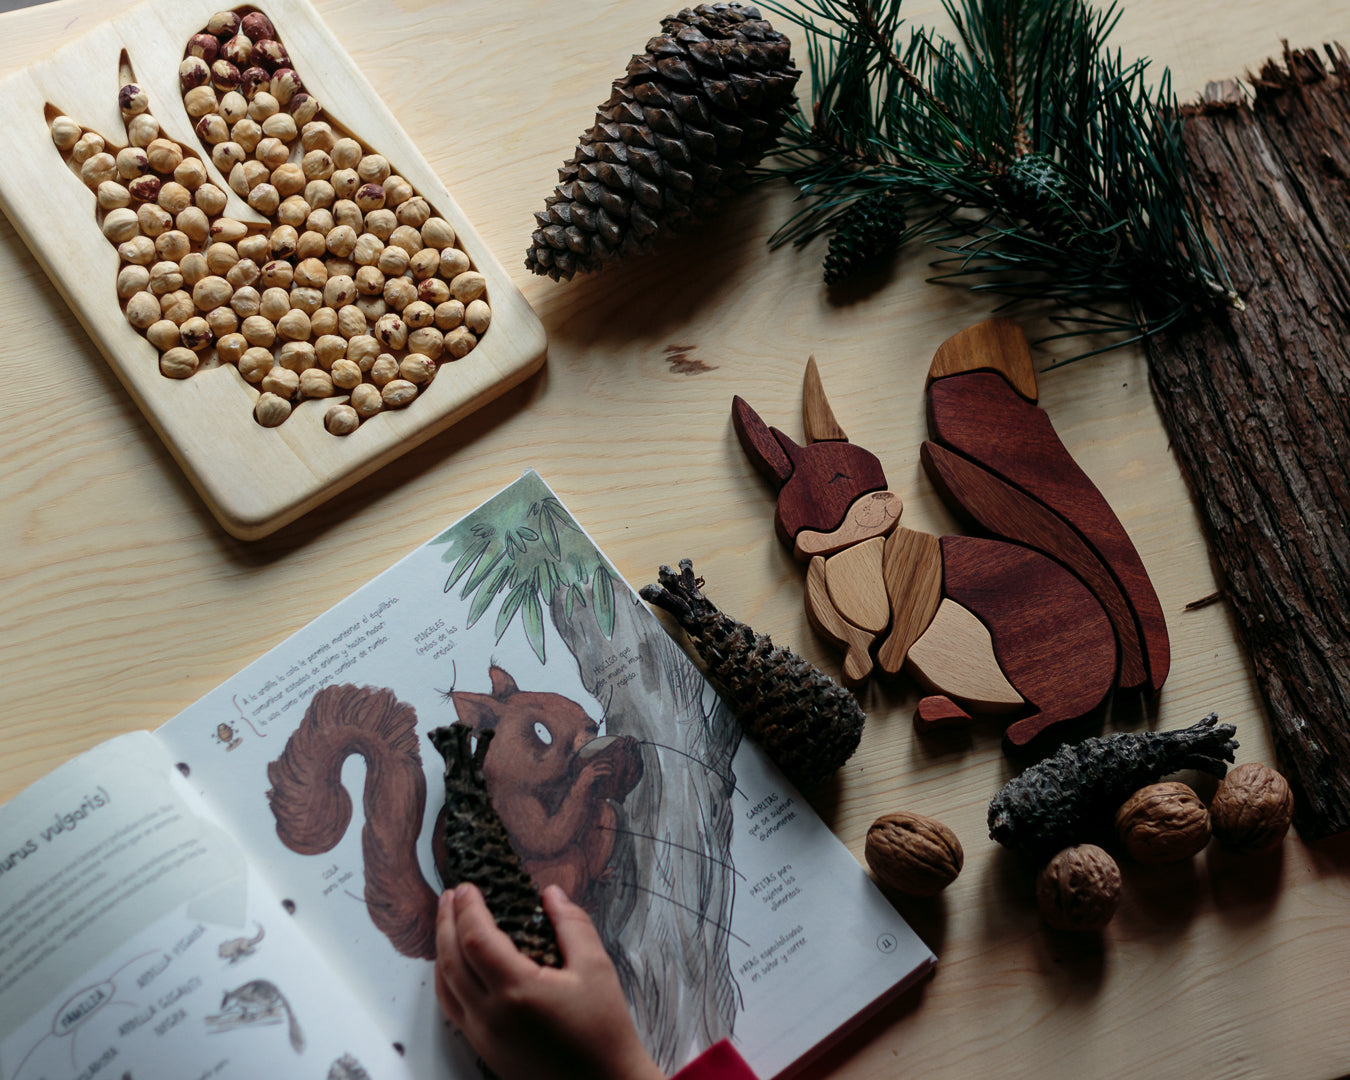 Wooden squirrel puzzle amist a dash of pinecones and a book on squirrels!